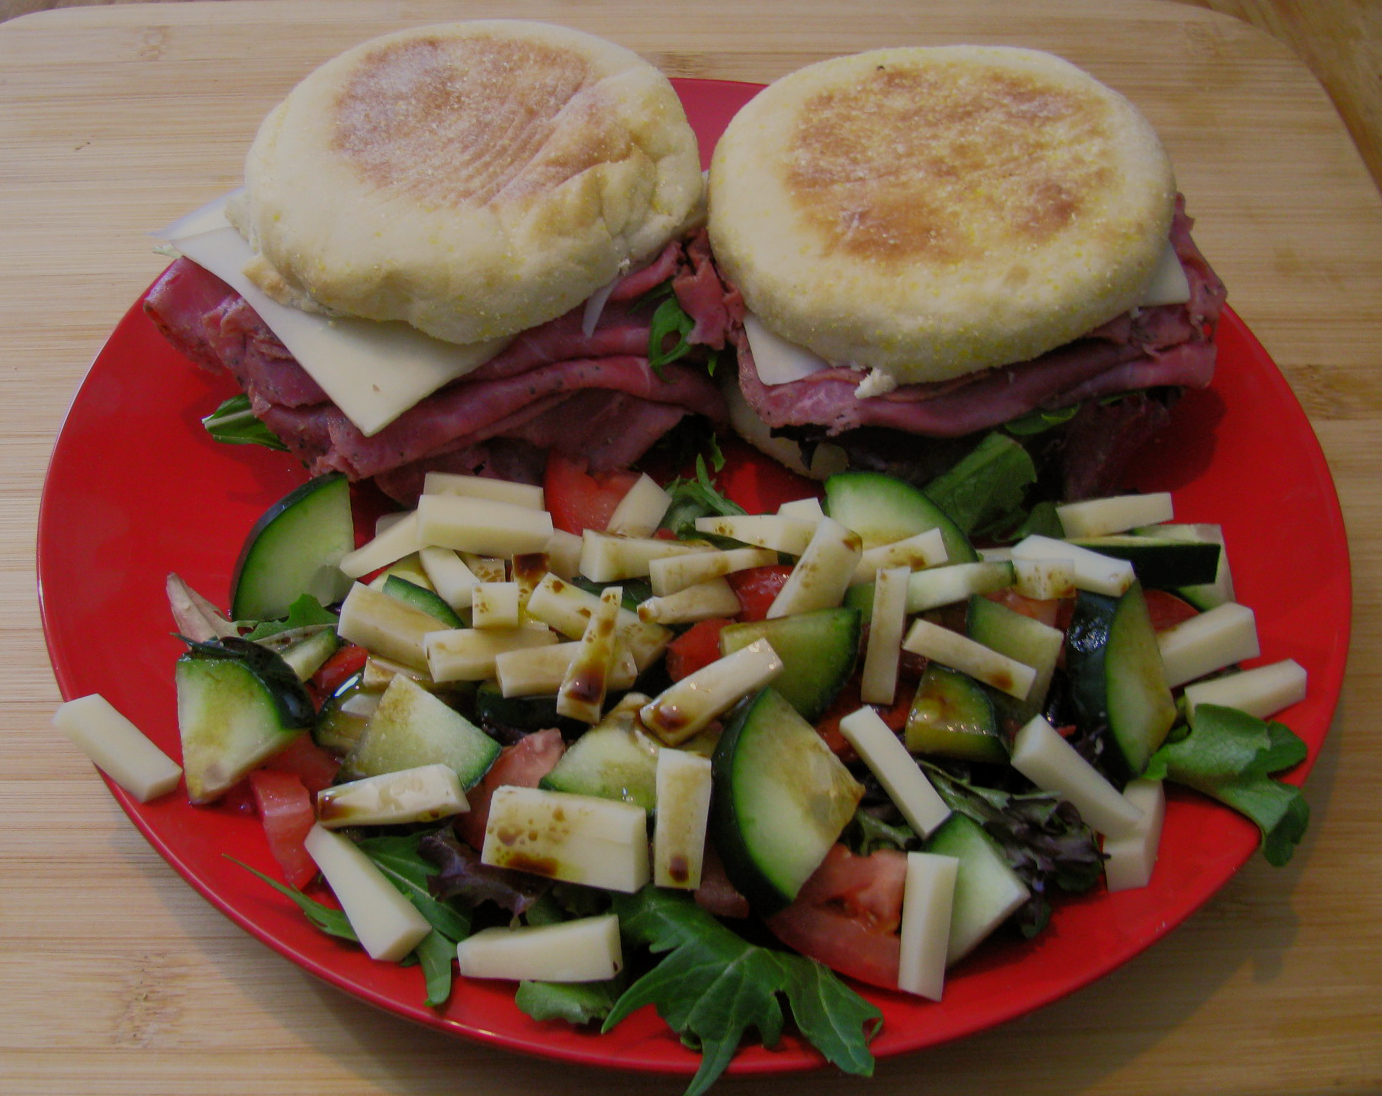 Pastrami Sandwiches and Salad